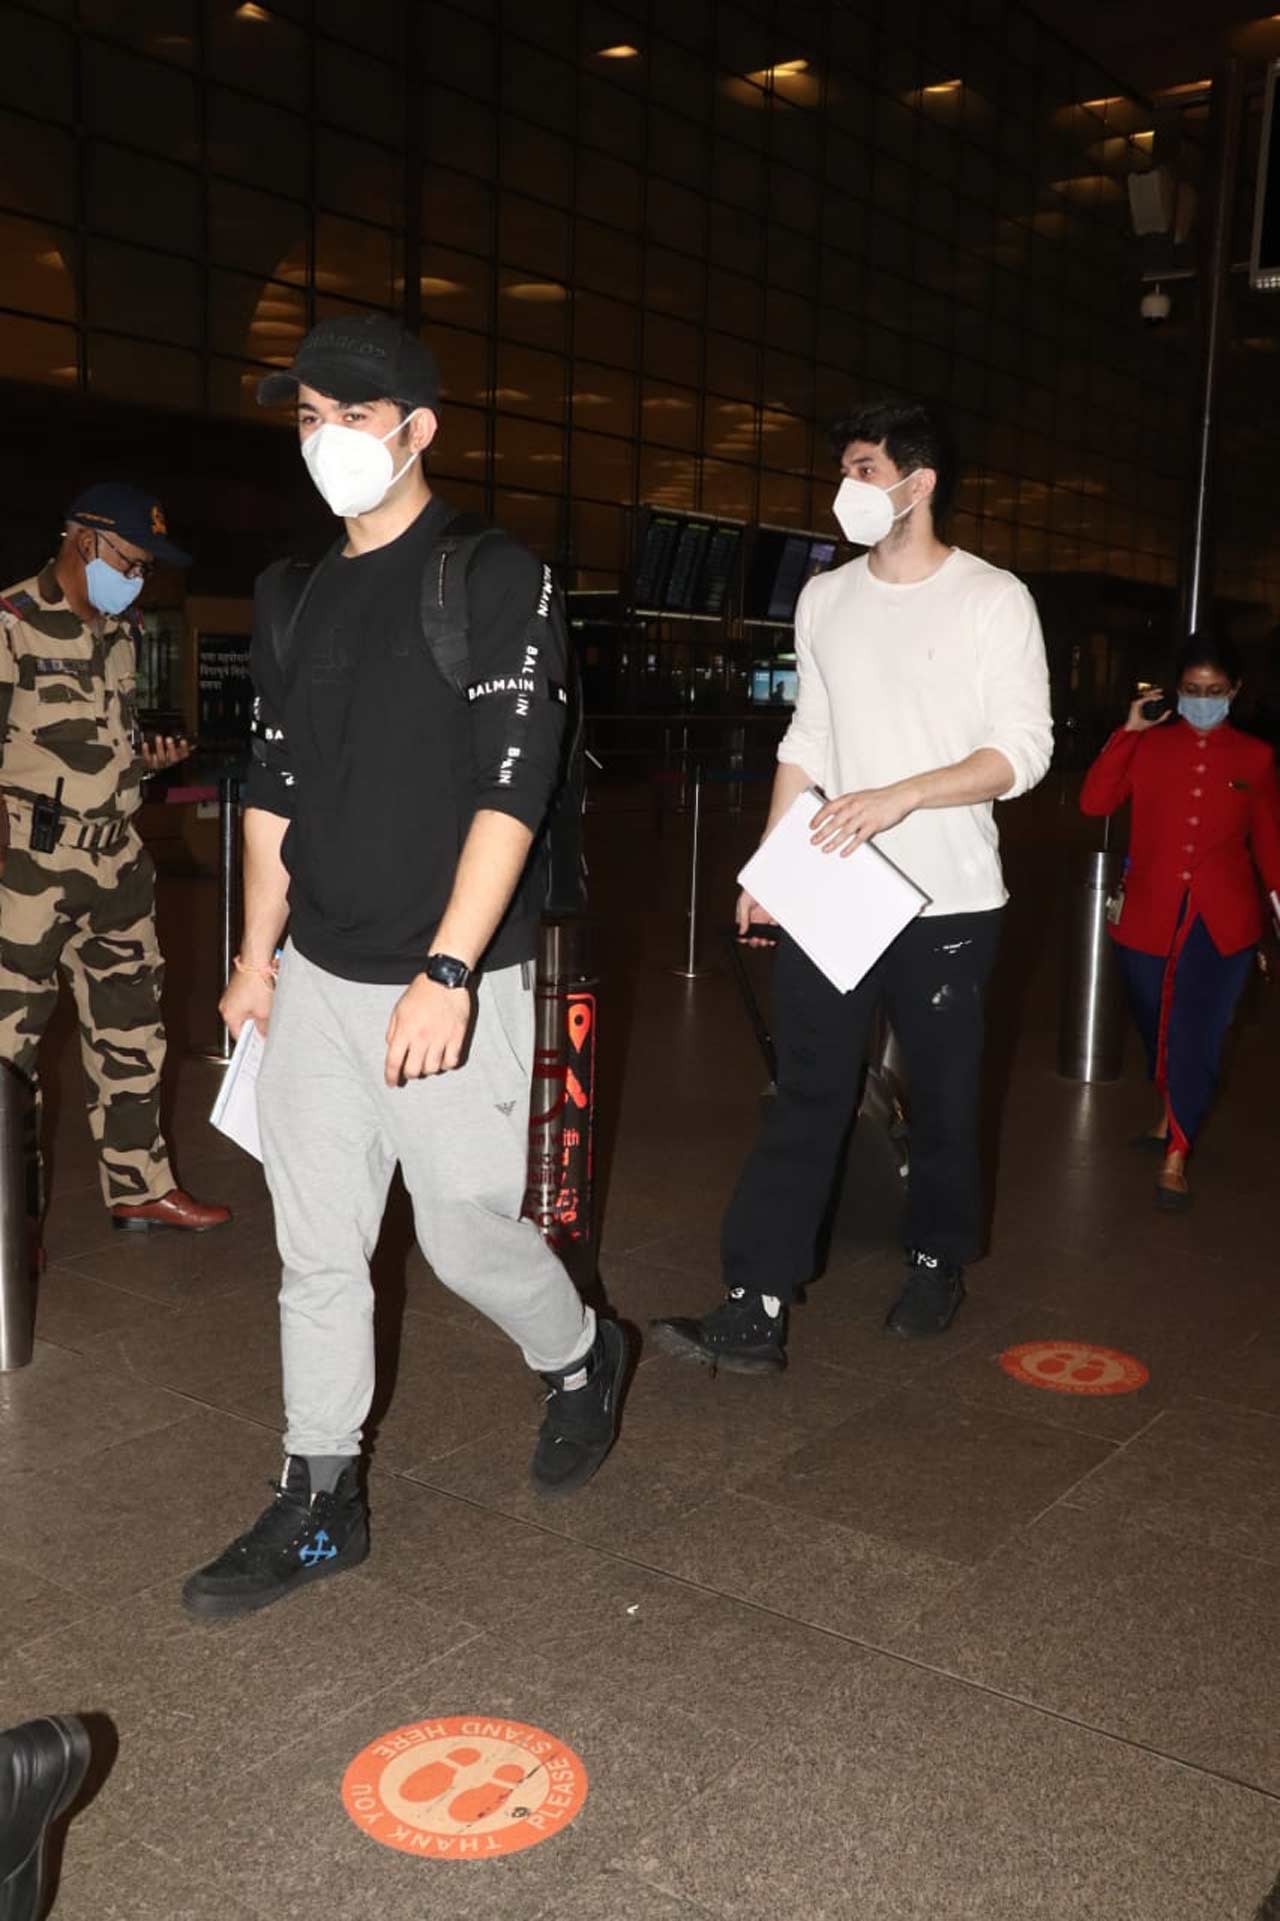 Deol brothers - Karan Deol and Rajveer Deol, were also clicked at the Mumbai airport.